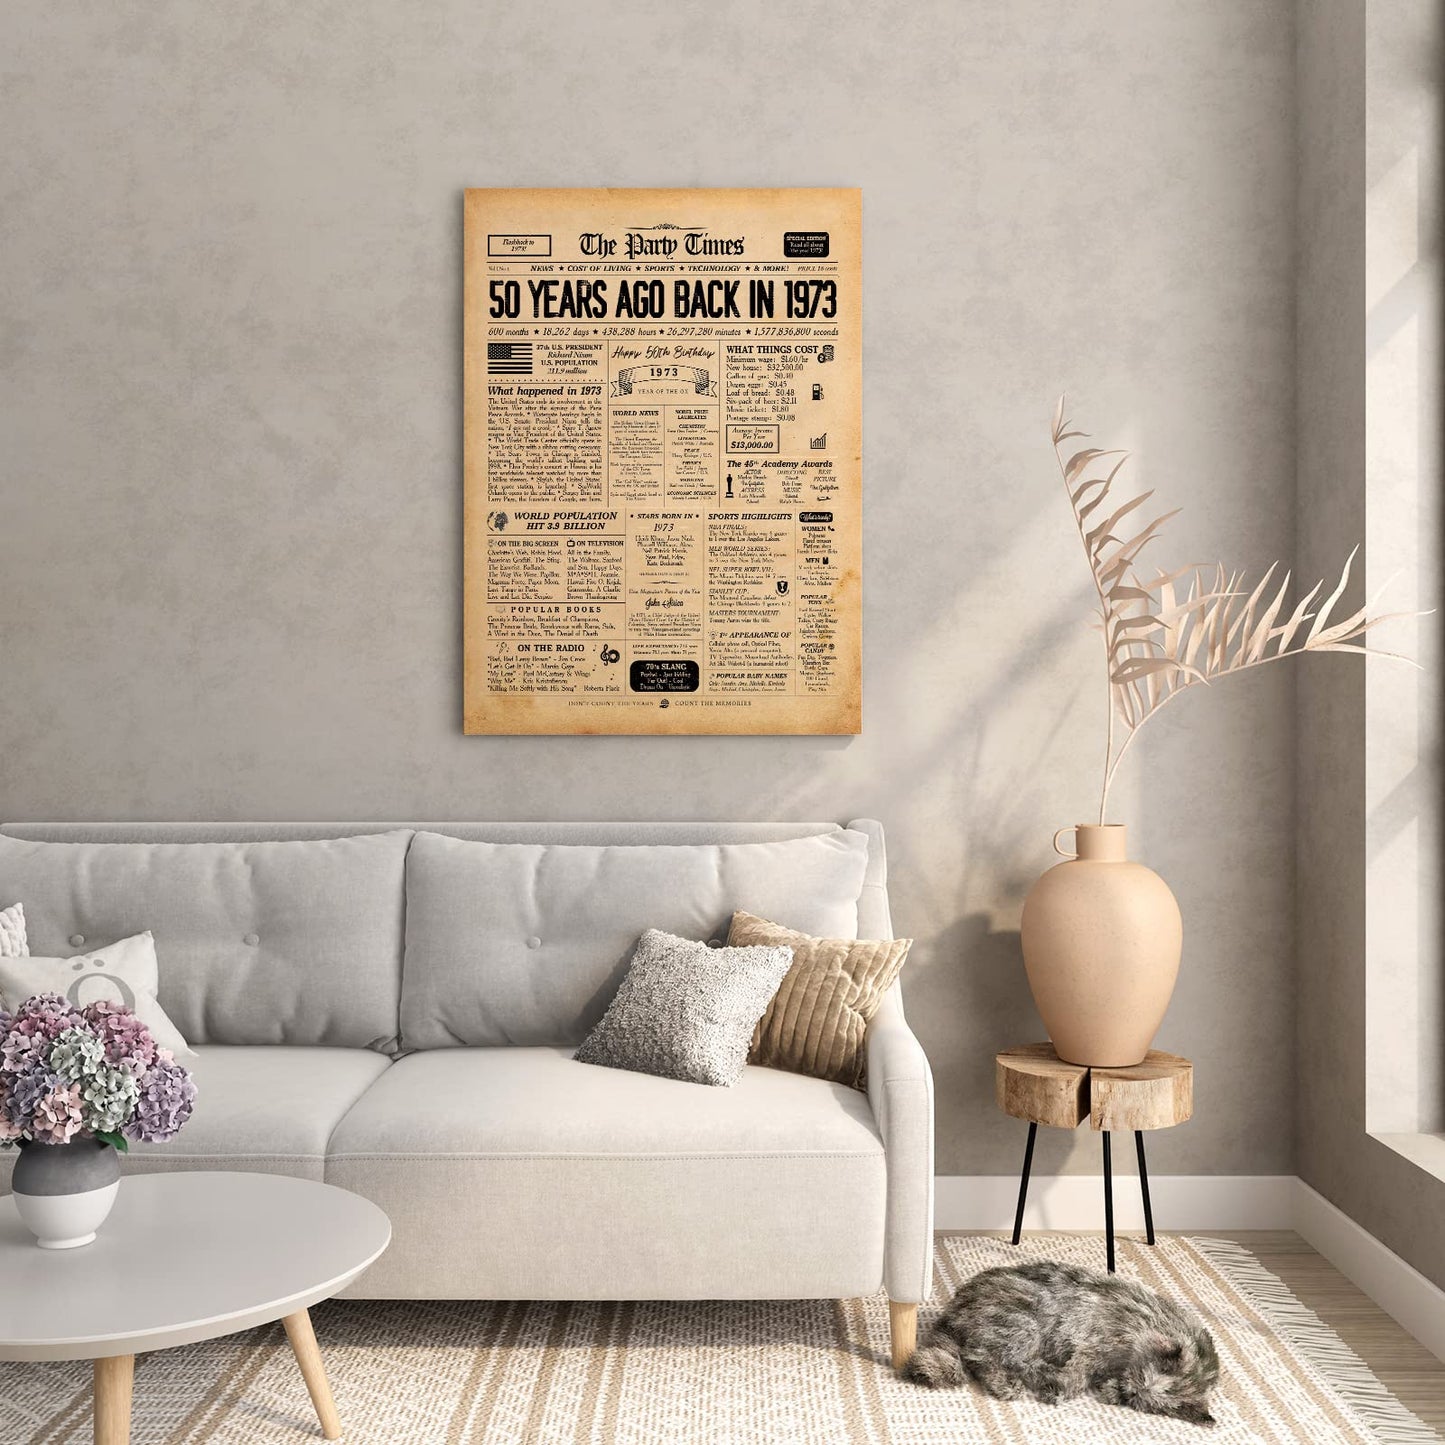 50th Birthday Newspaper Wall Art Canvas Poster Decorative with Frame (11.5×15 inch), Back in 1973 Print 1973 birthday poster Vintage 50th Birthday Decorations Poster for Home Wall Decor, SRZT50S